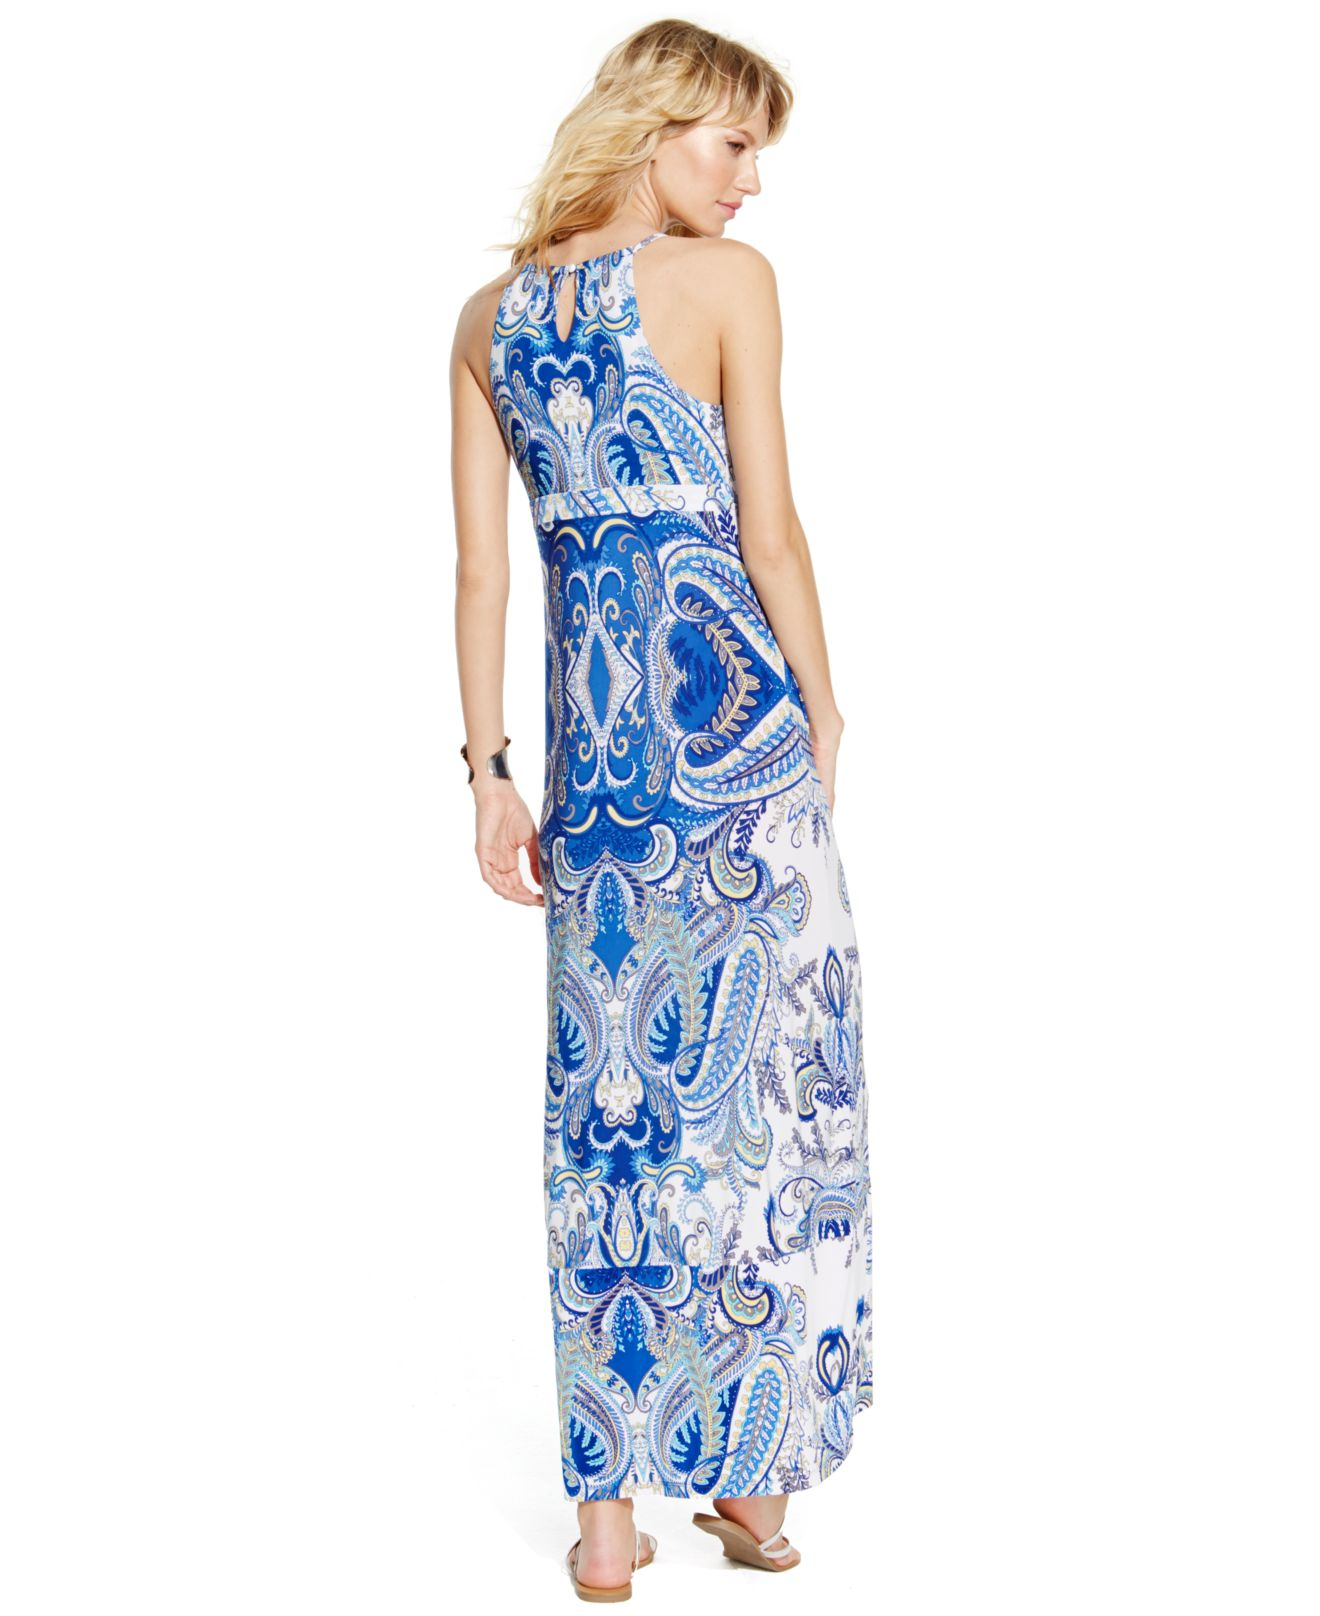 INC International Concepts Printed Beaded Halter Maxi Dress in Blue - Lyst